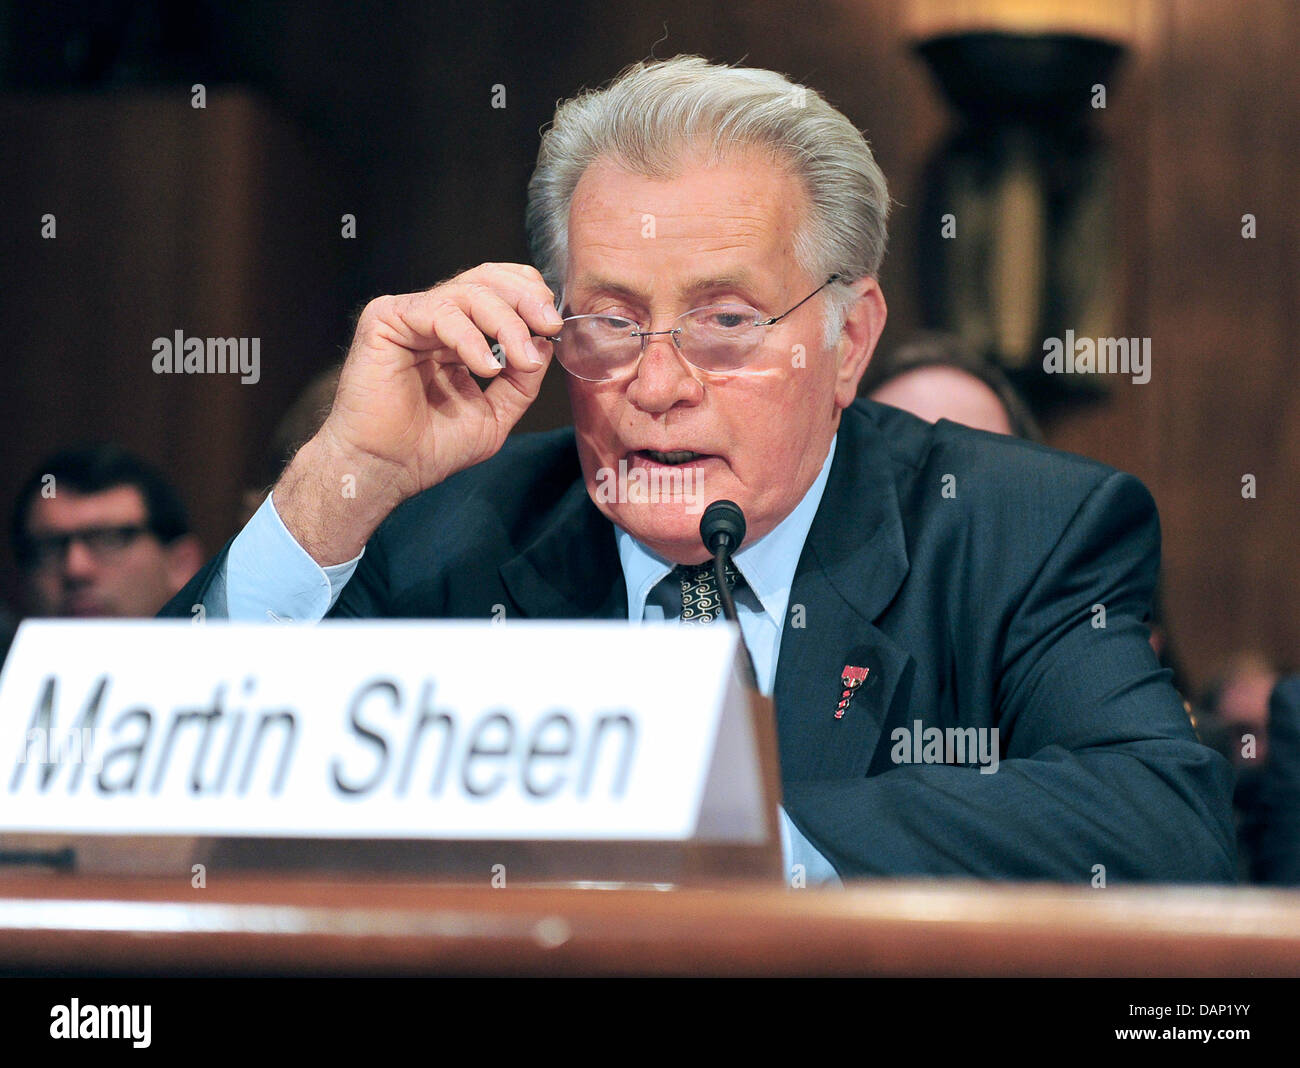 Actor Martin Sheen testifies during a hearing before the United States Senate Committee on the Judiciary Subcommittee on Crime and Terrorism on 'Drug and Veterans Treatment Courts: Seeking Cost-Effective Solutions for Protecting Public Safety and Reducing Recidivism' in Washington, USA, on July 19, 2011. Photo: Ron Sachs/CNP Stock Photo